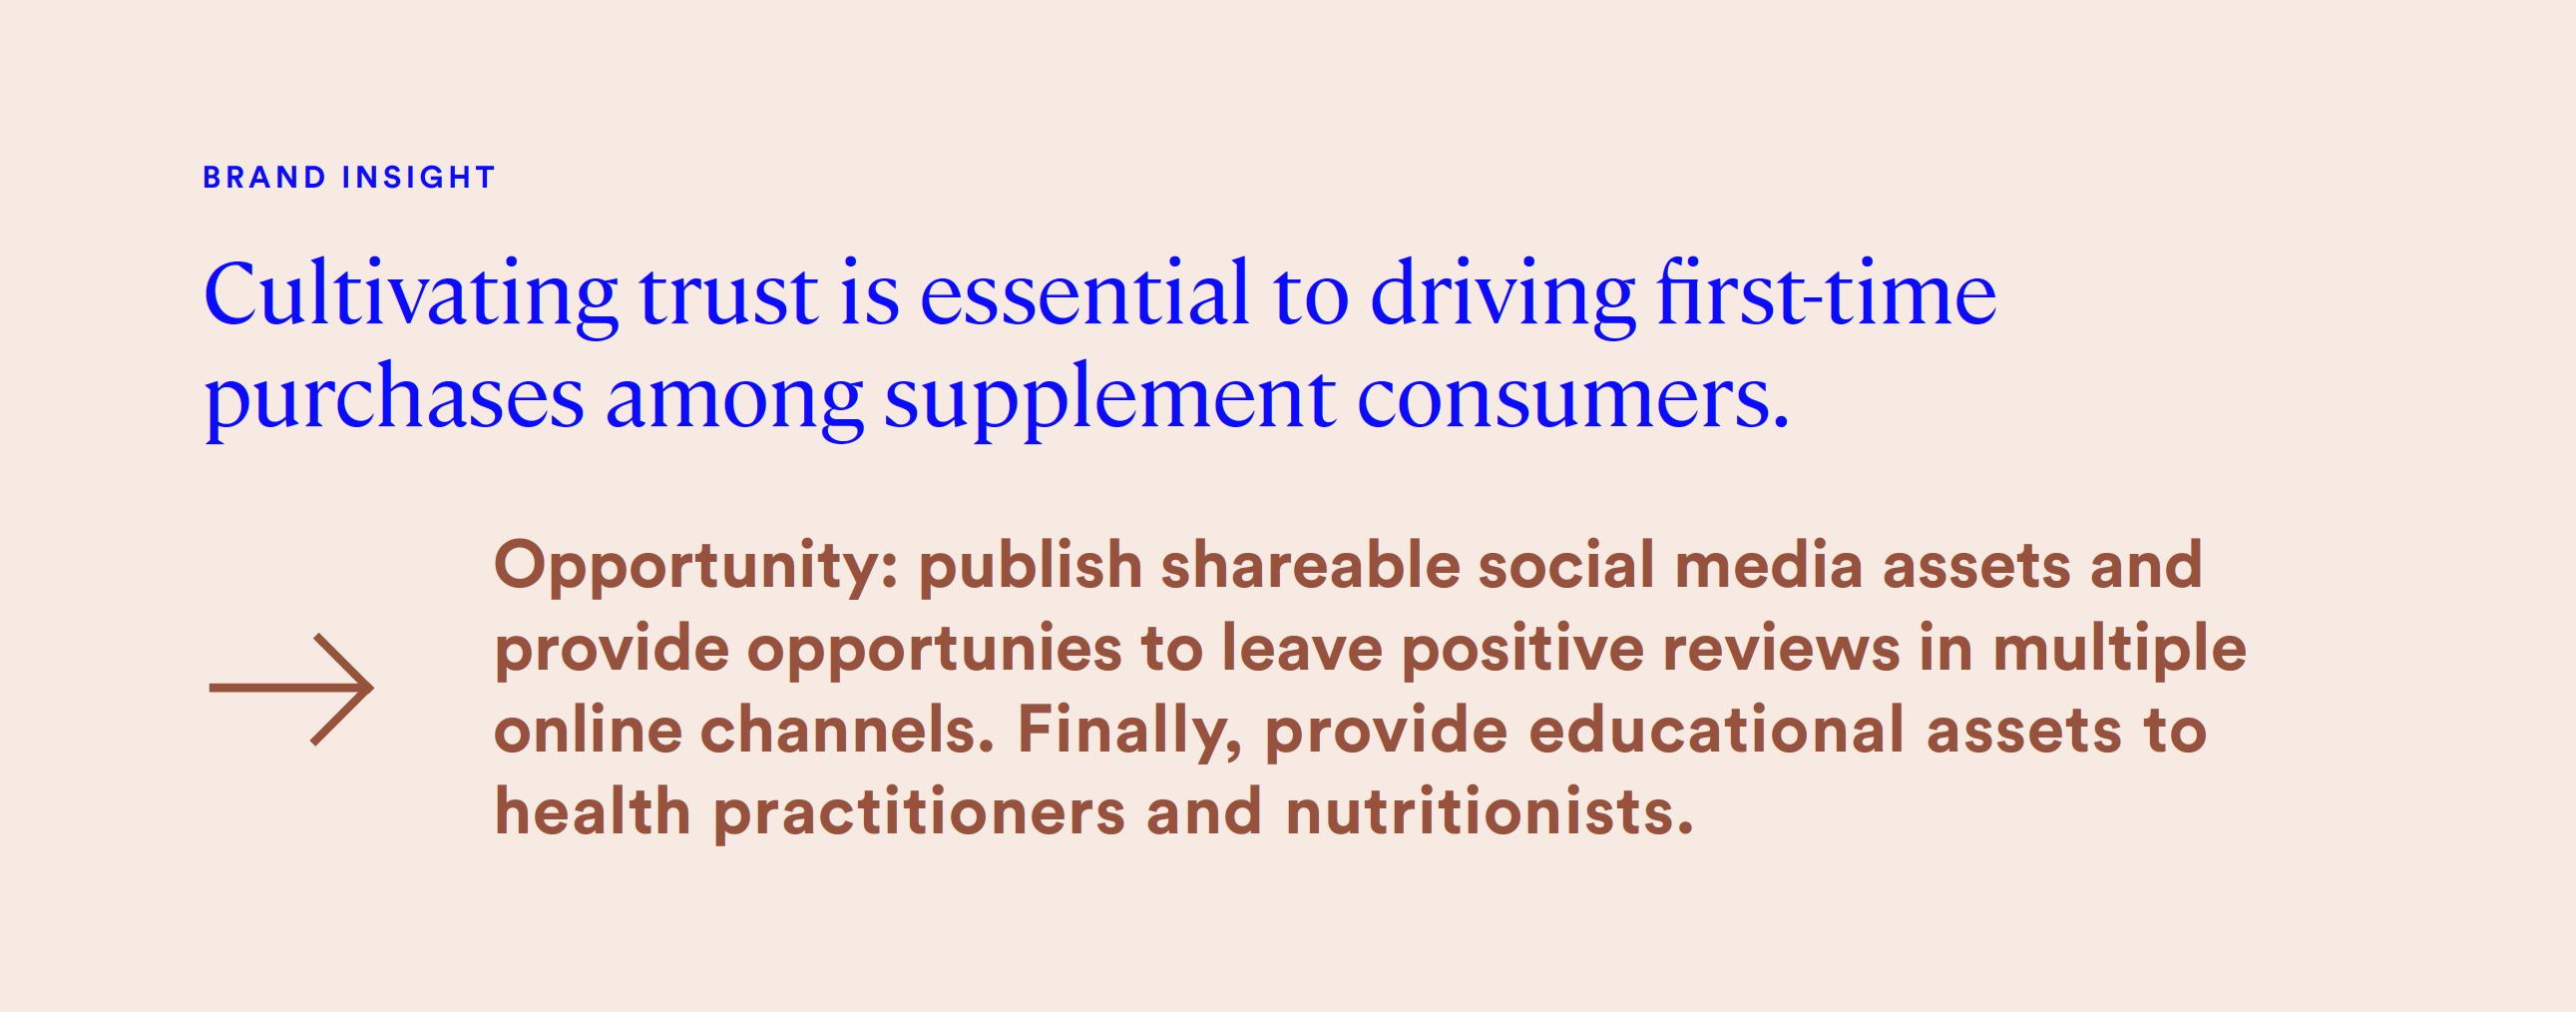 cultivating trust is essential to driving first-time purchases among supplement consumers.